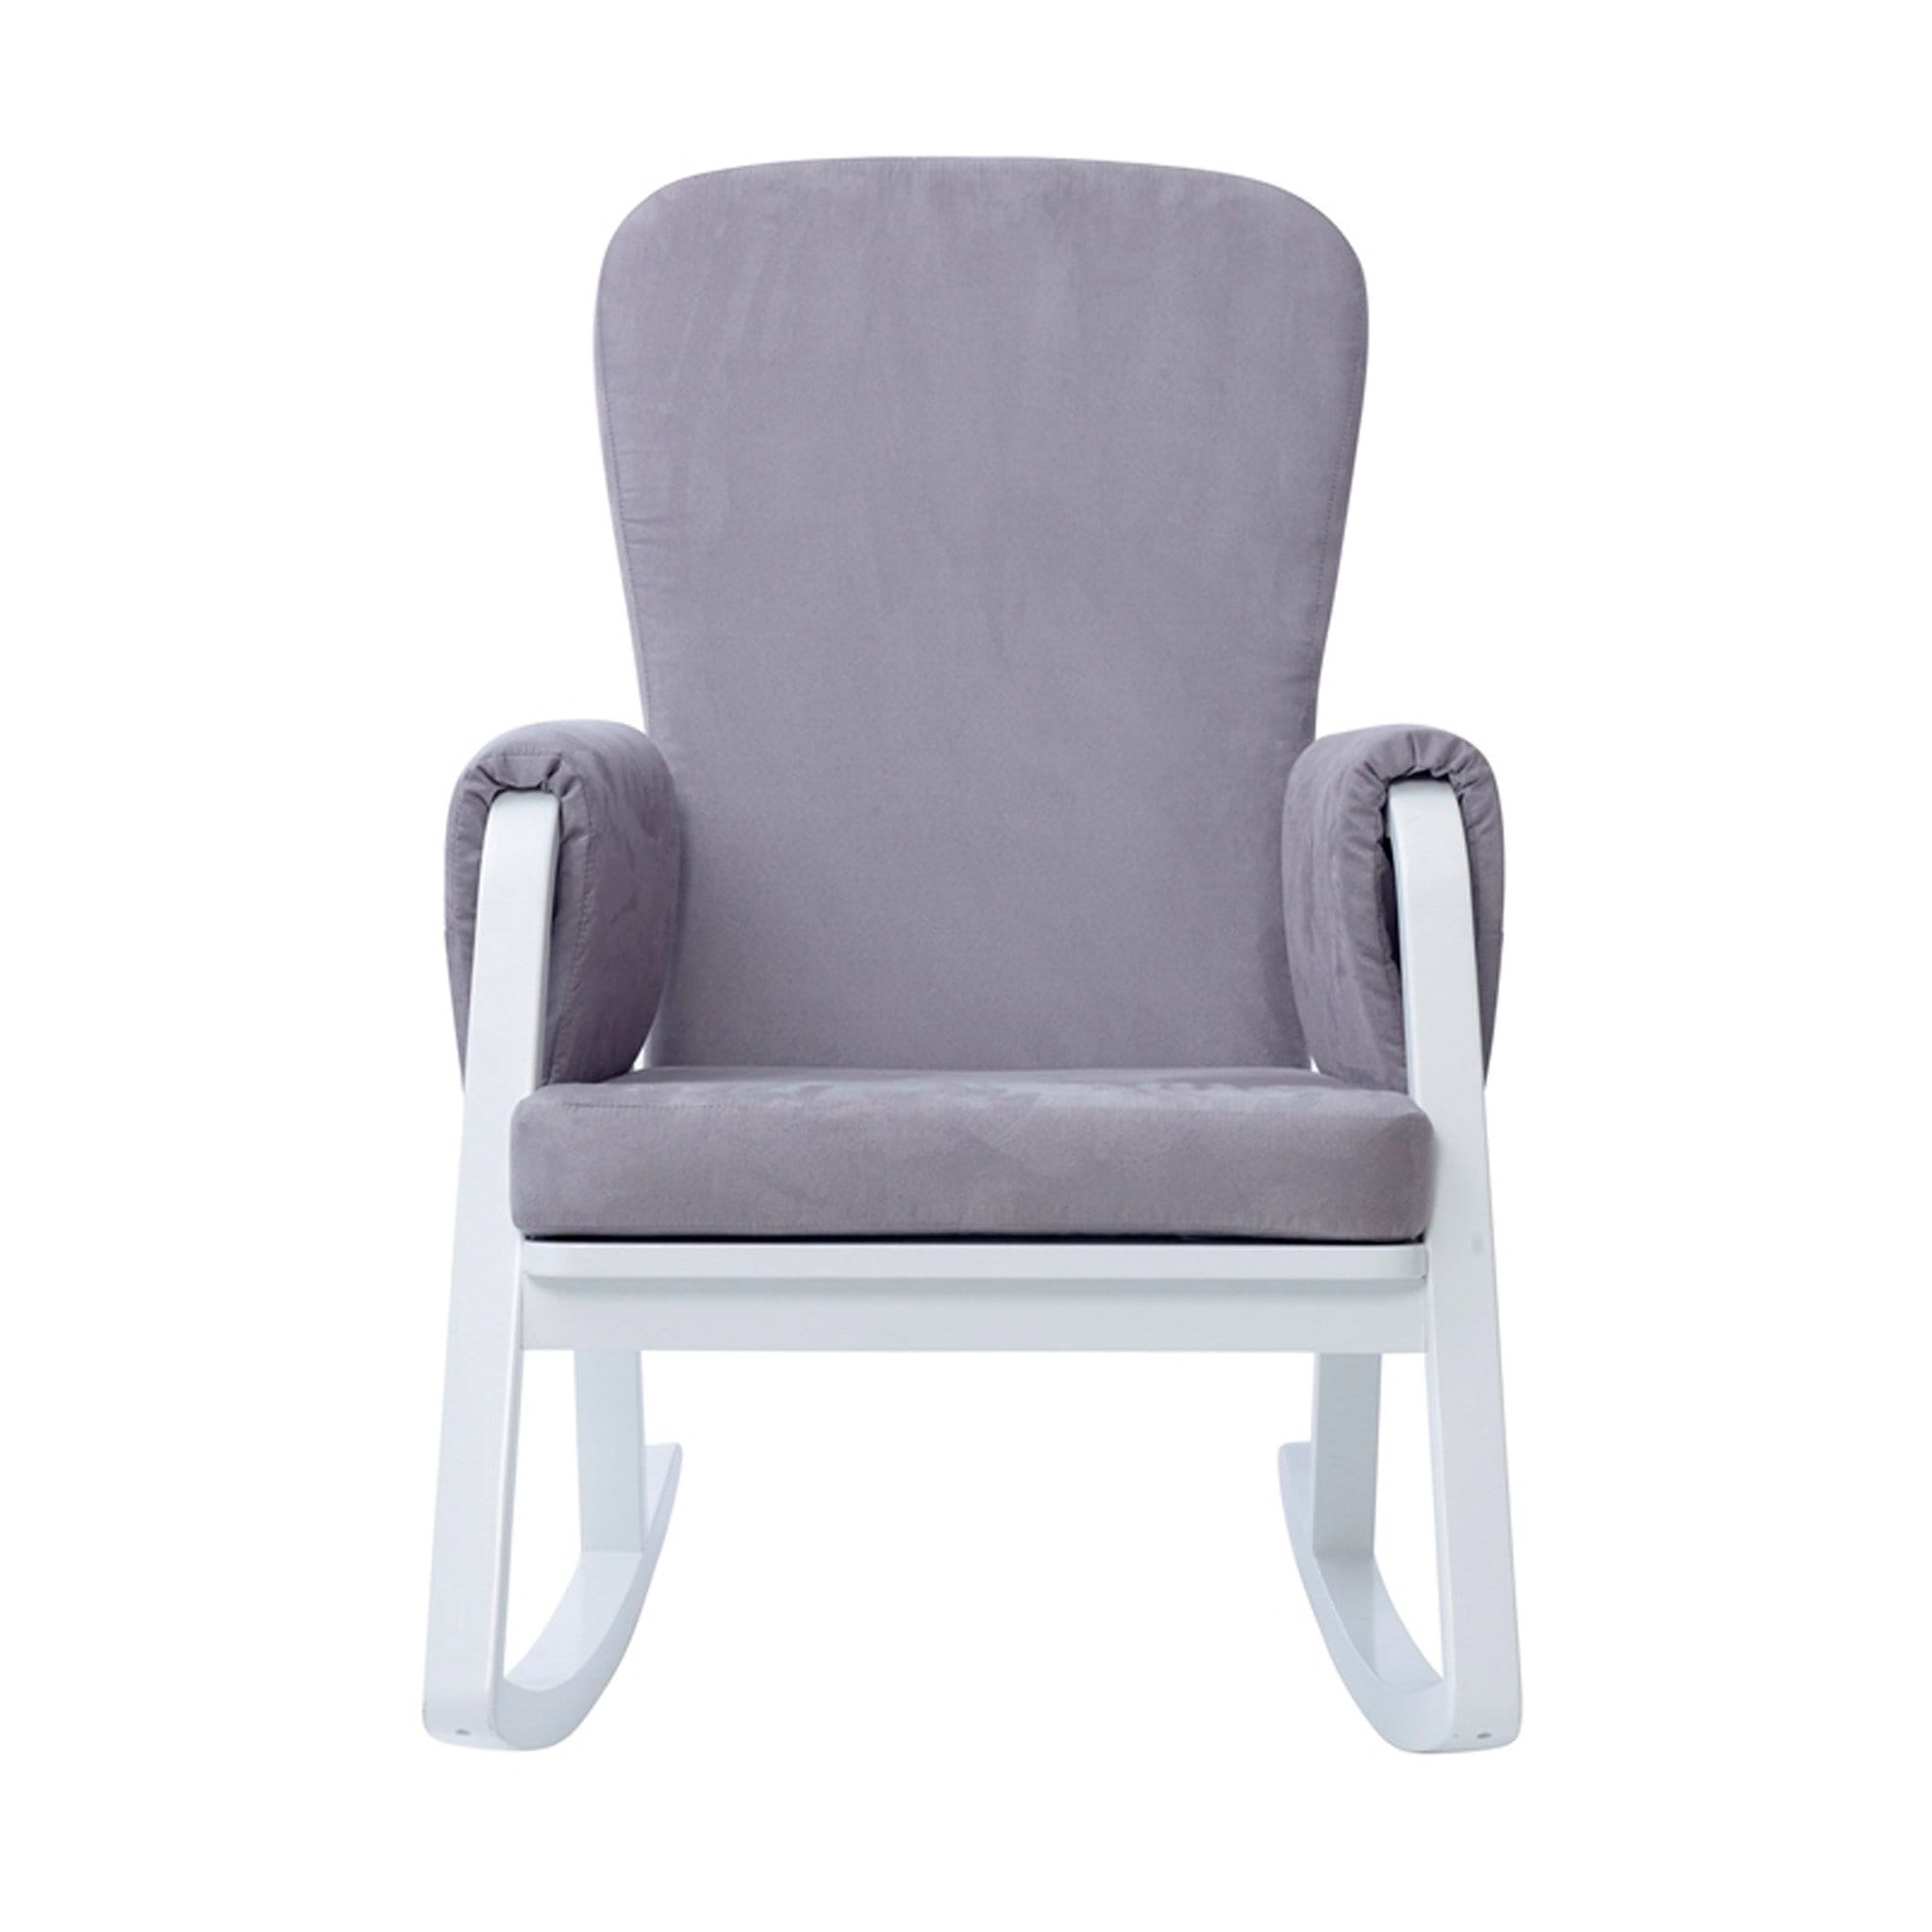 Ickle Bubba nursing chairs Ickle Bubba Dursley Rocking Chair Pearl Grey 48-004-000-840